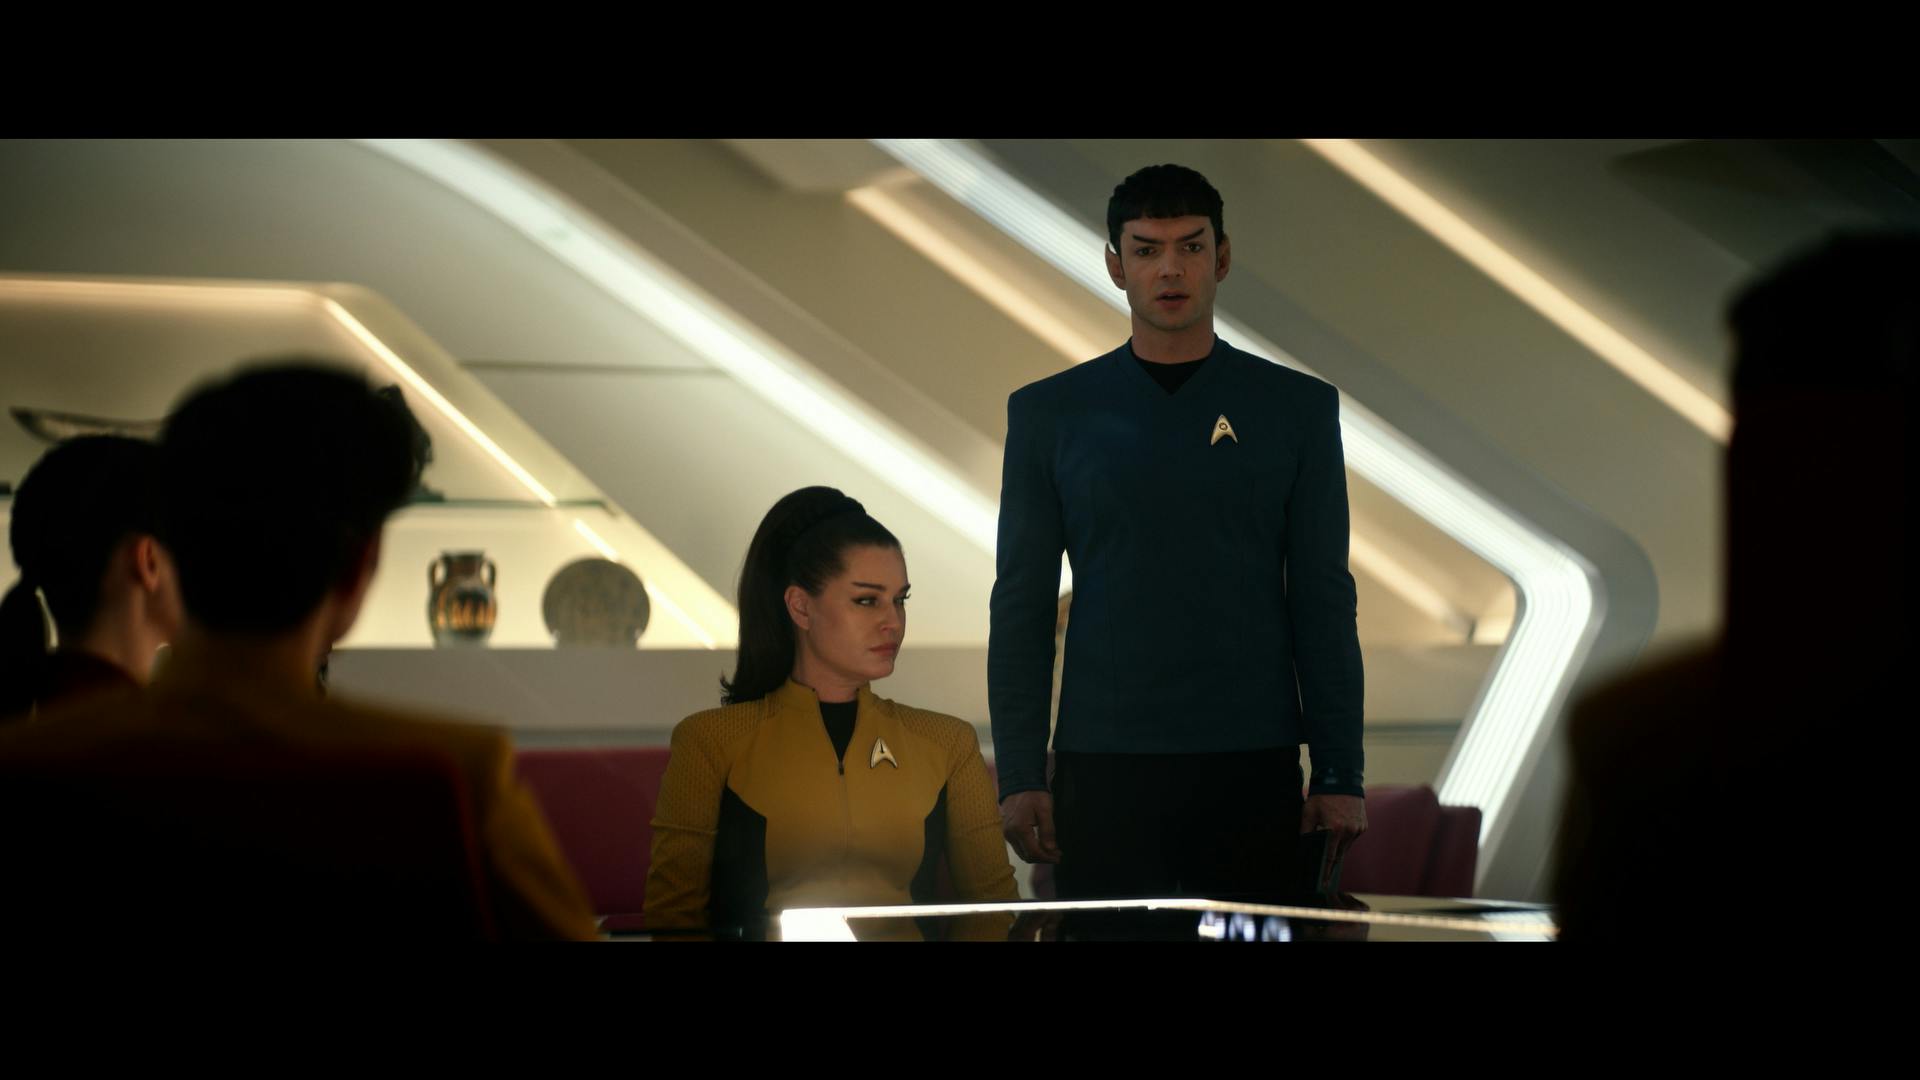 In Pike's ready room, Spock faces the conference table where Number One, La'An, Sam Kirk, and Pike are seated in 'Subspace Rhapsody'